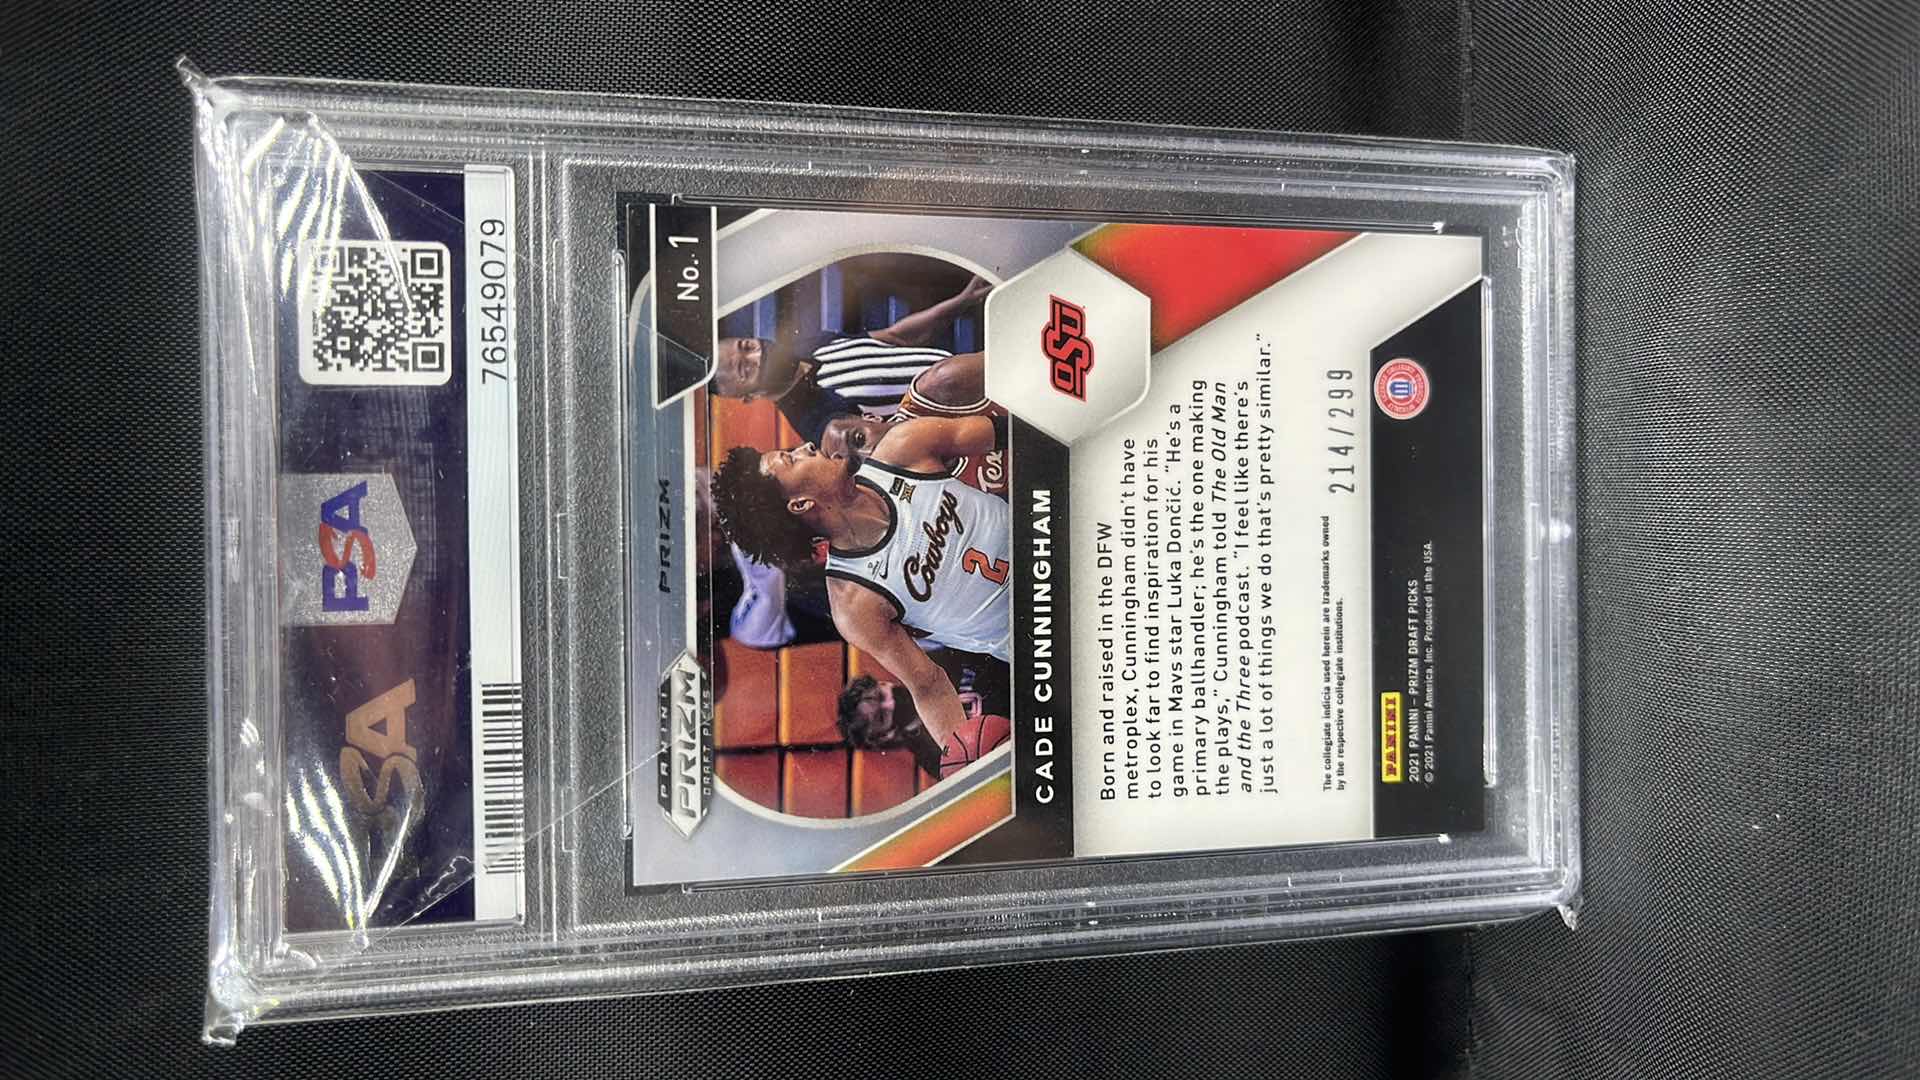 Photo 2 of 2021 CADE CUNNINGHAM PANINI PRIZM 214 RATED 9